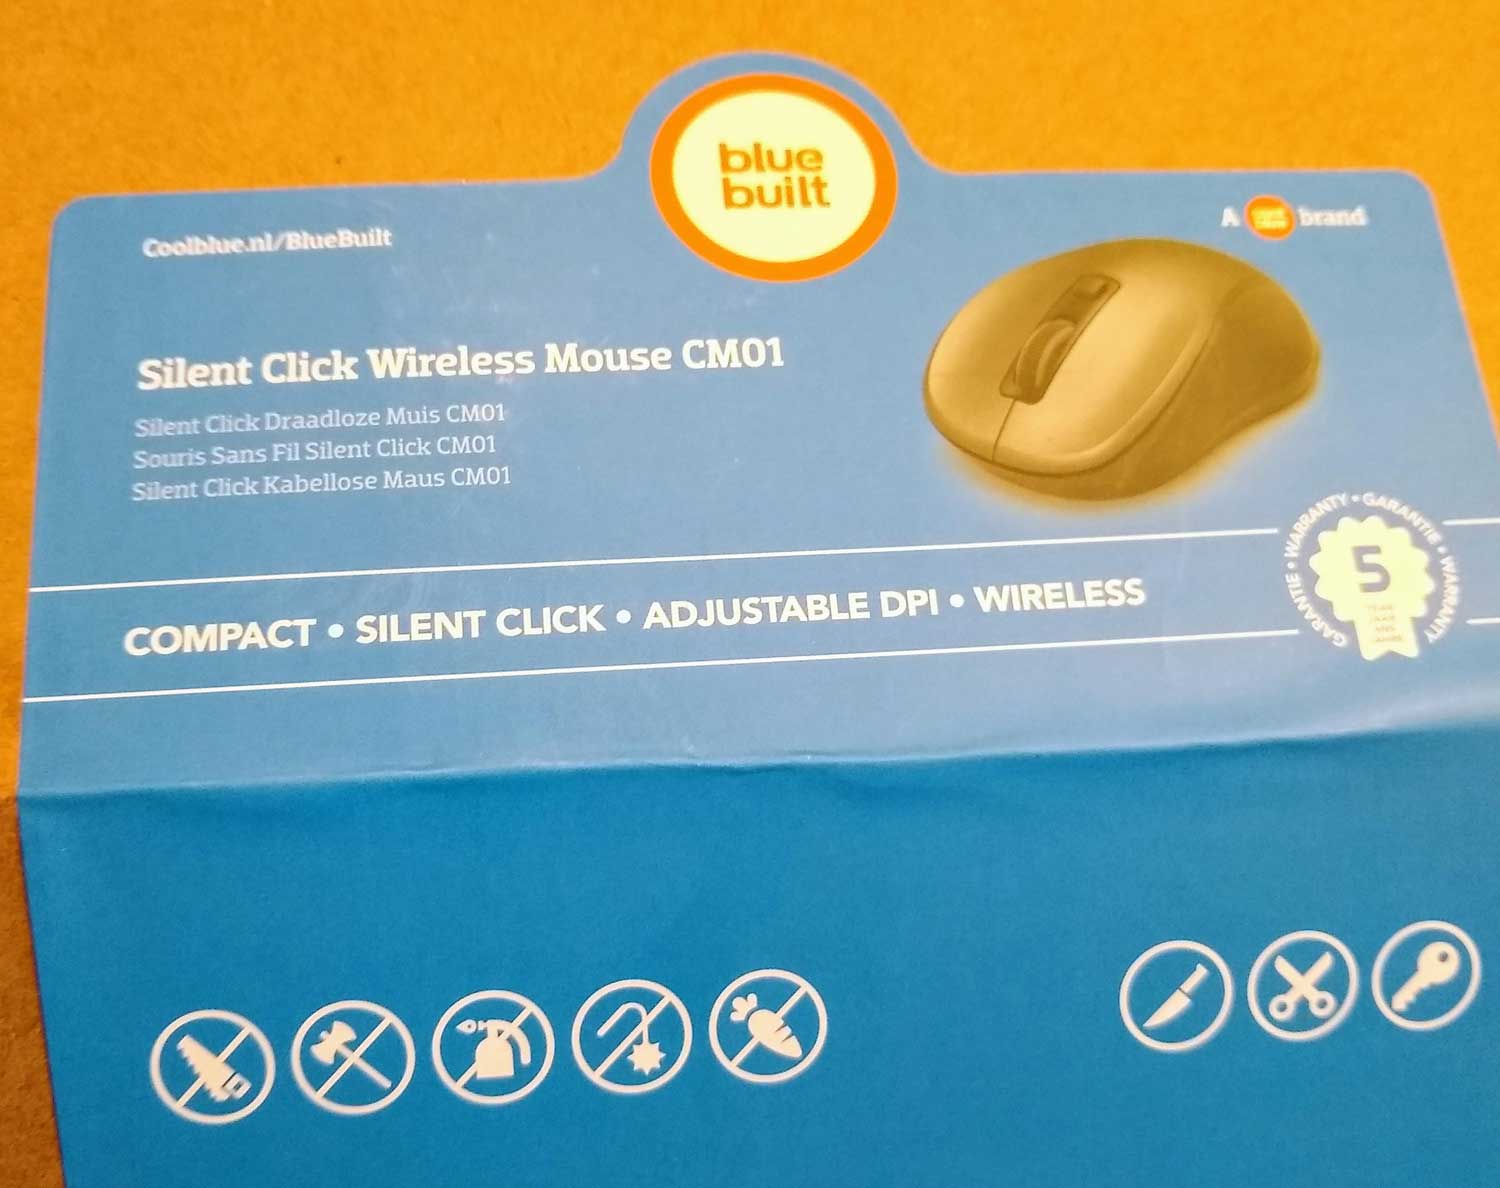 These warning signs on my wireless mouse